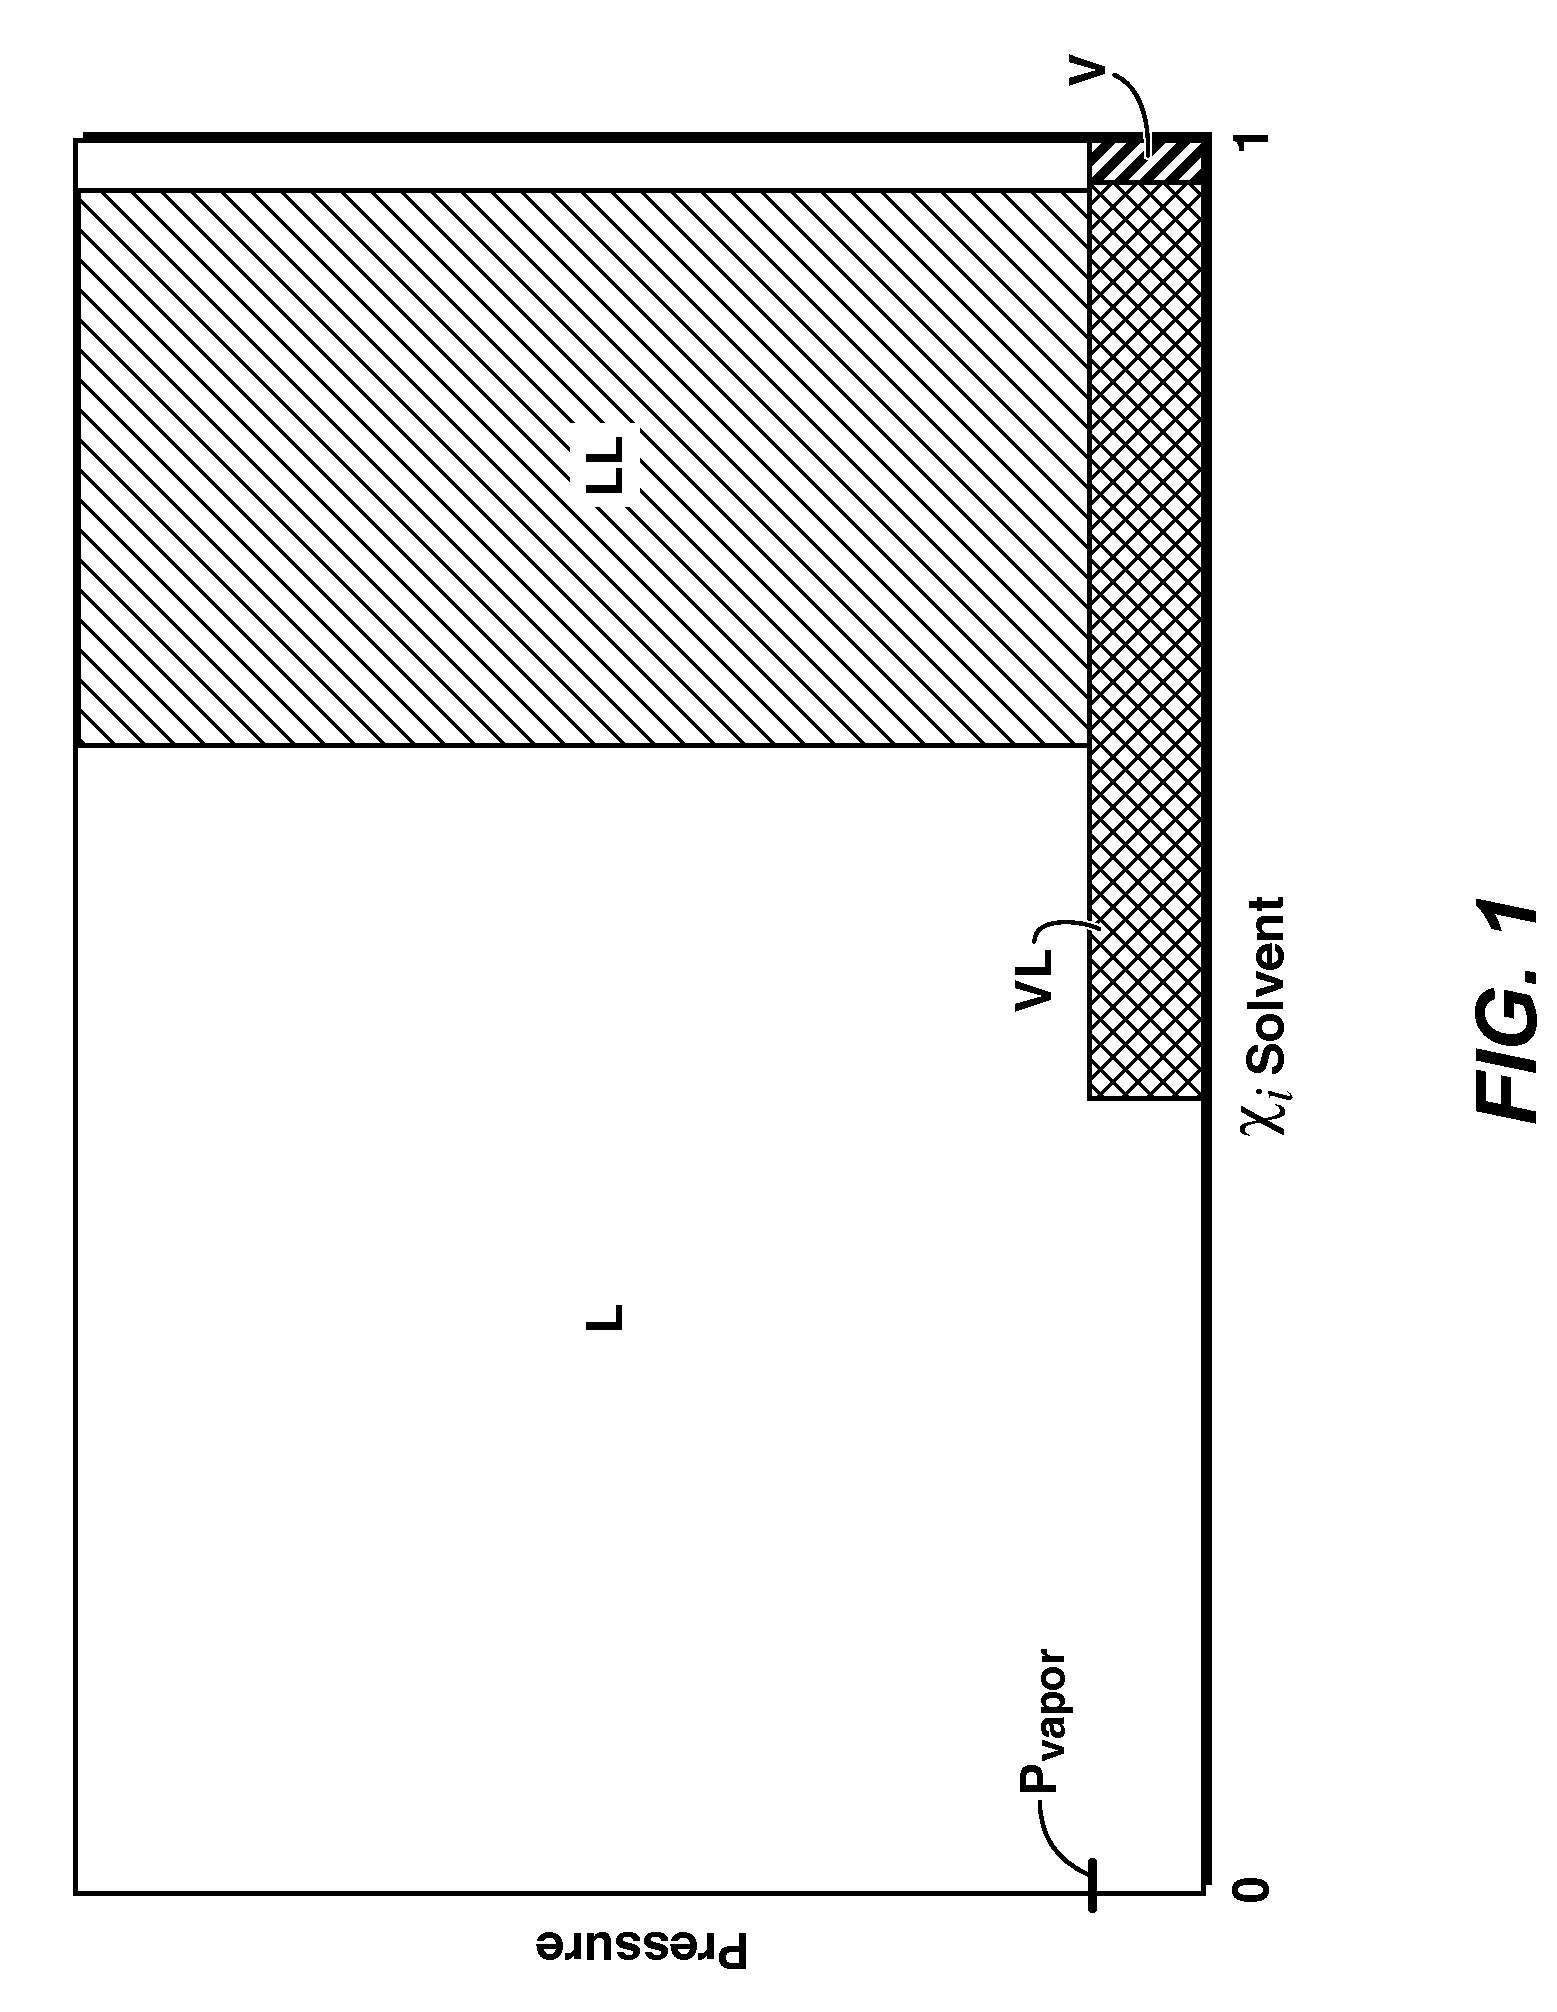 Solvent separation in a solvent-dominated recovery process